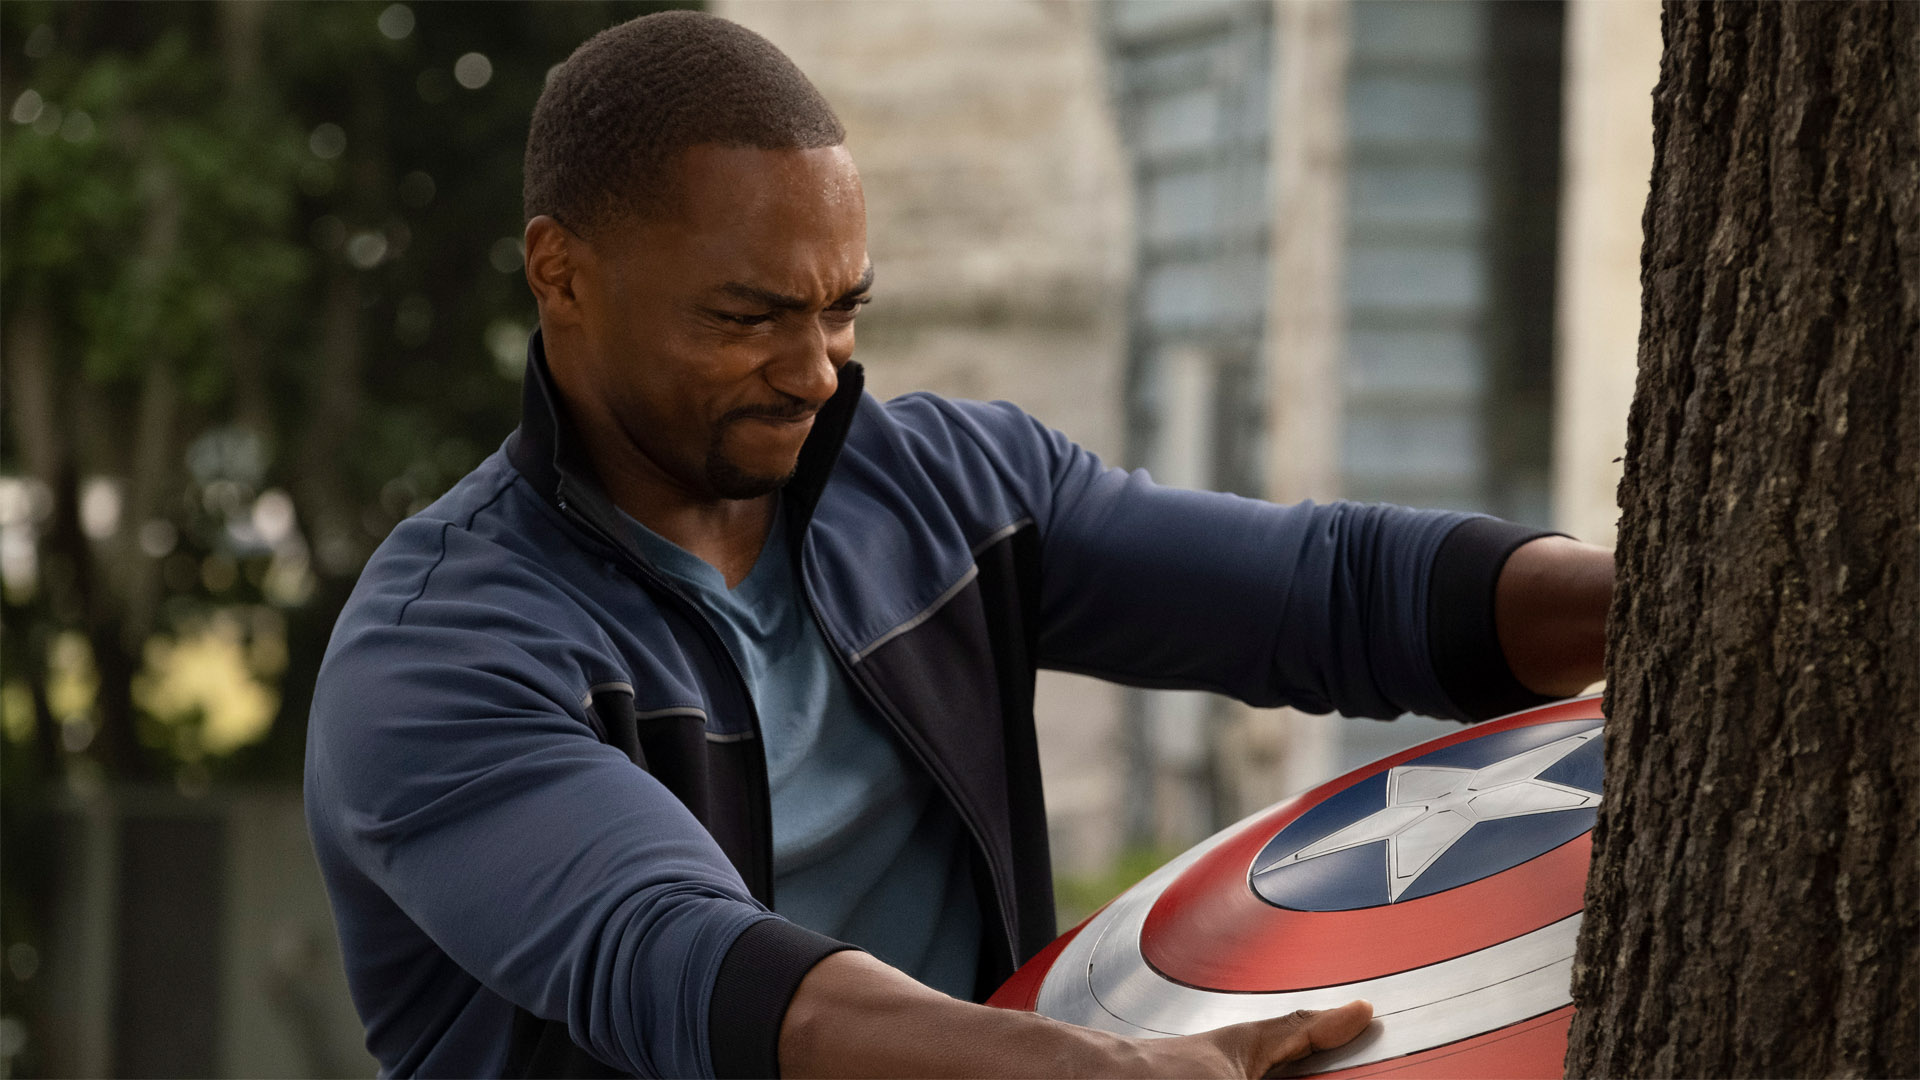 The Falcon And The Winter Soldier Episode 5 Recap Let Down By A Rushed Ending Techradar